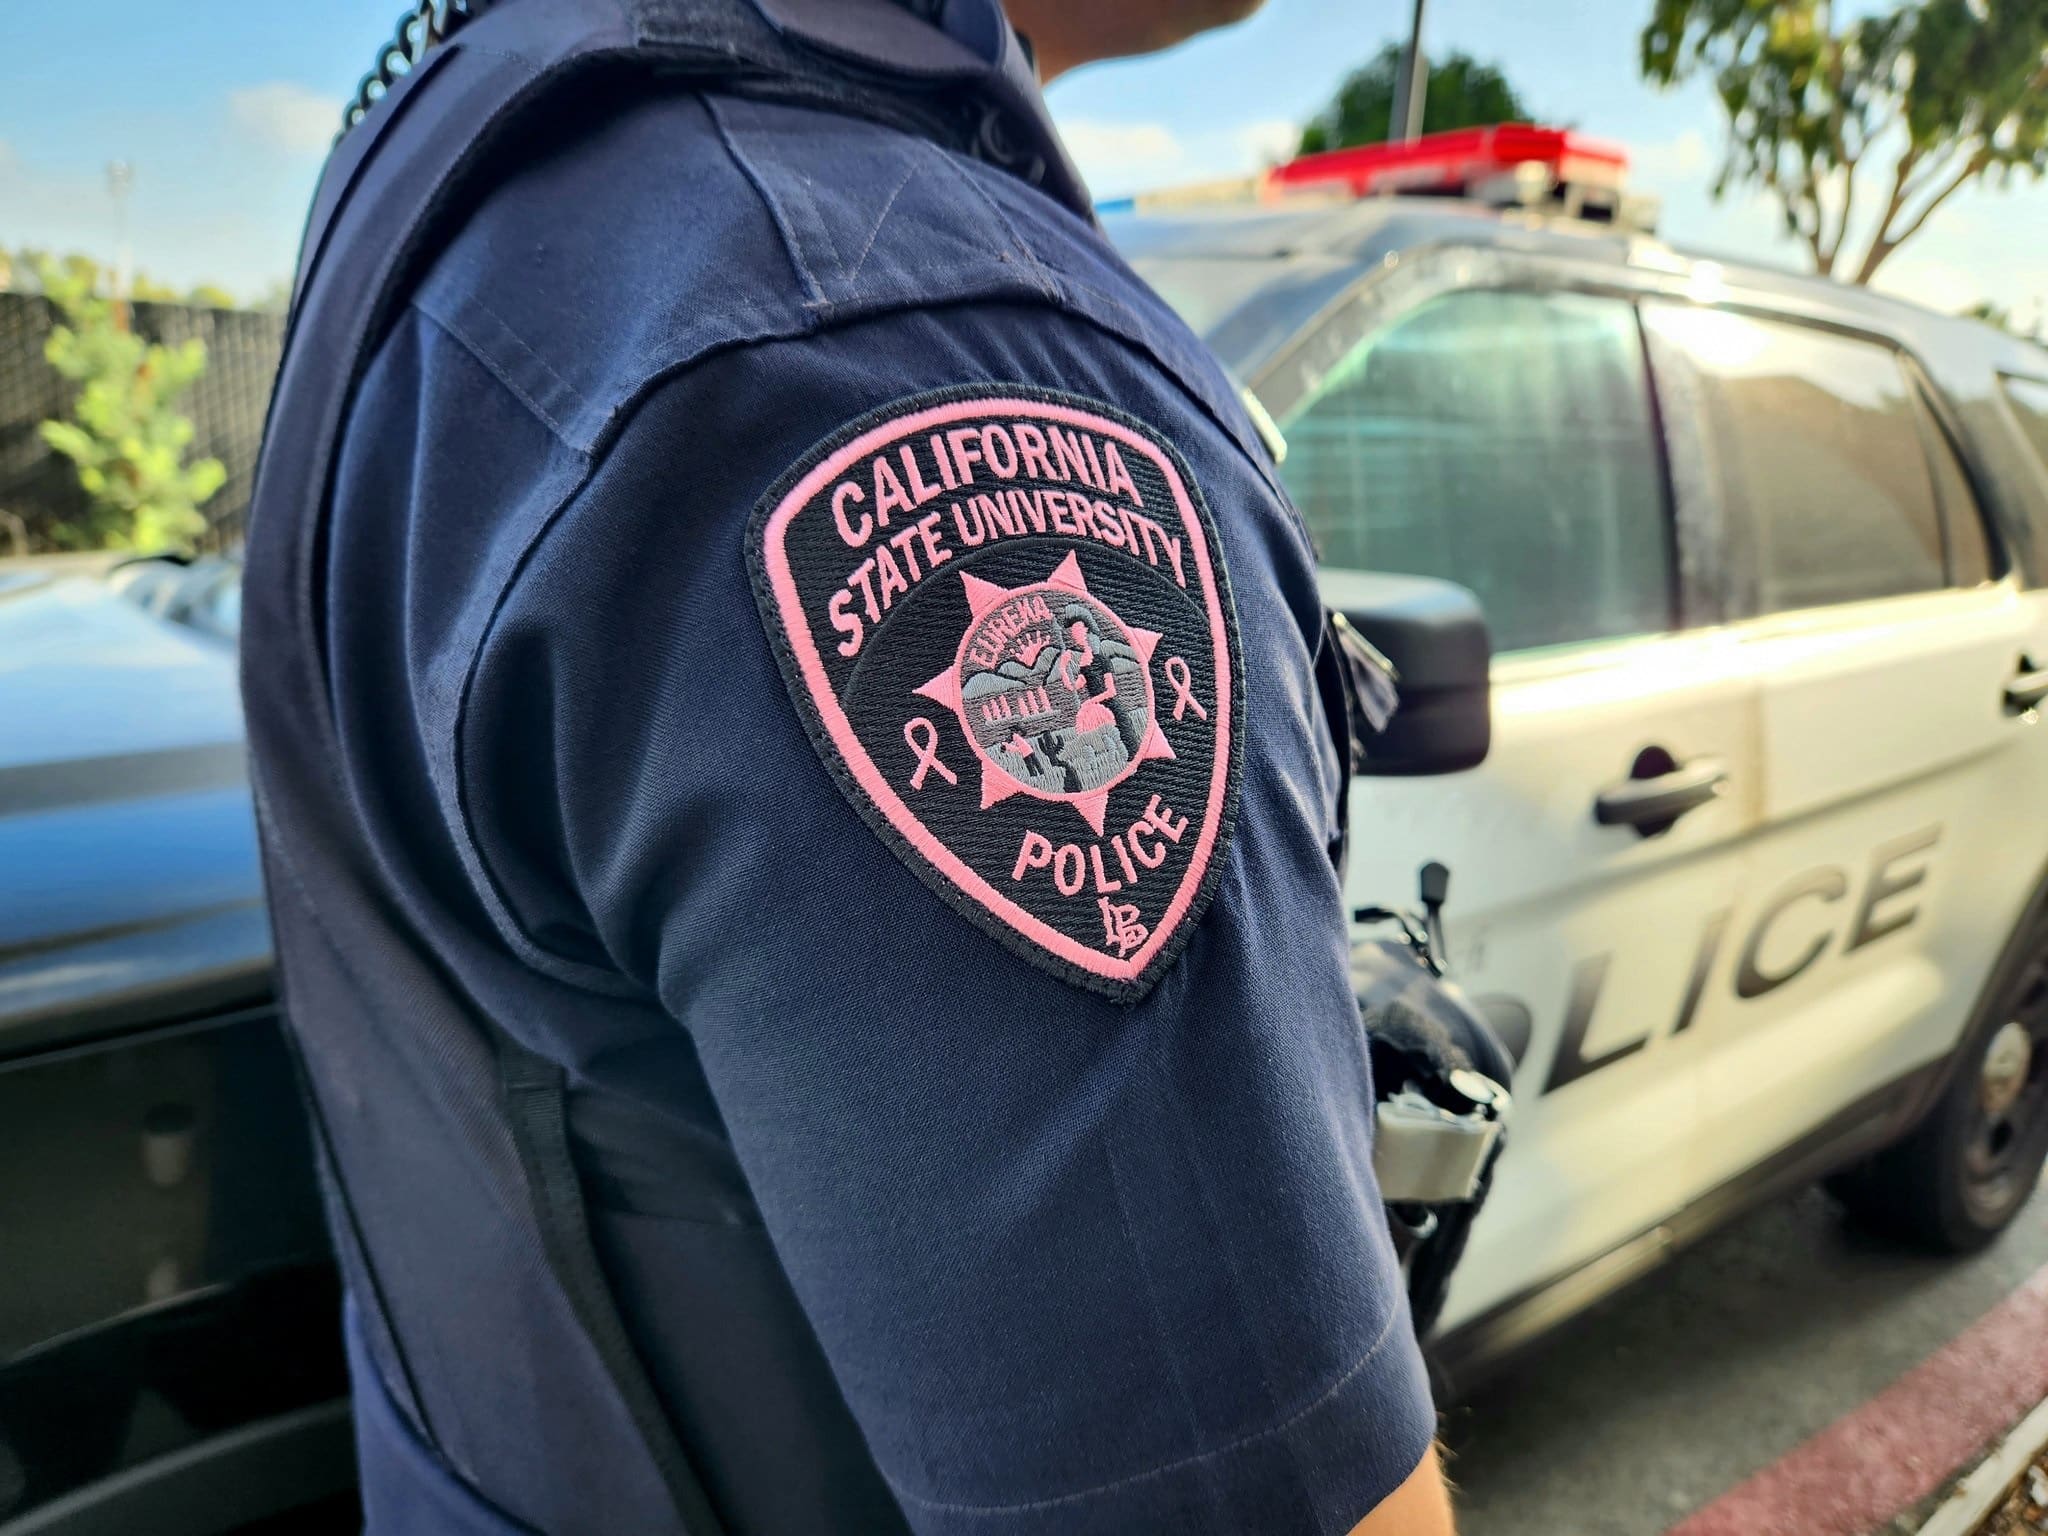 CSULB Police Pink Patch worn by a CSULB Police patrol officer